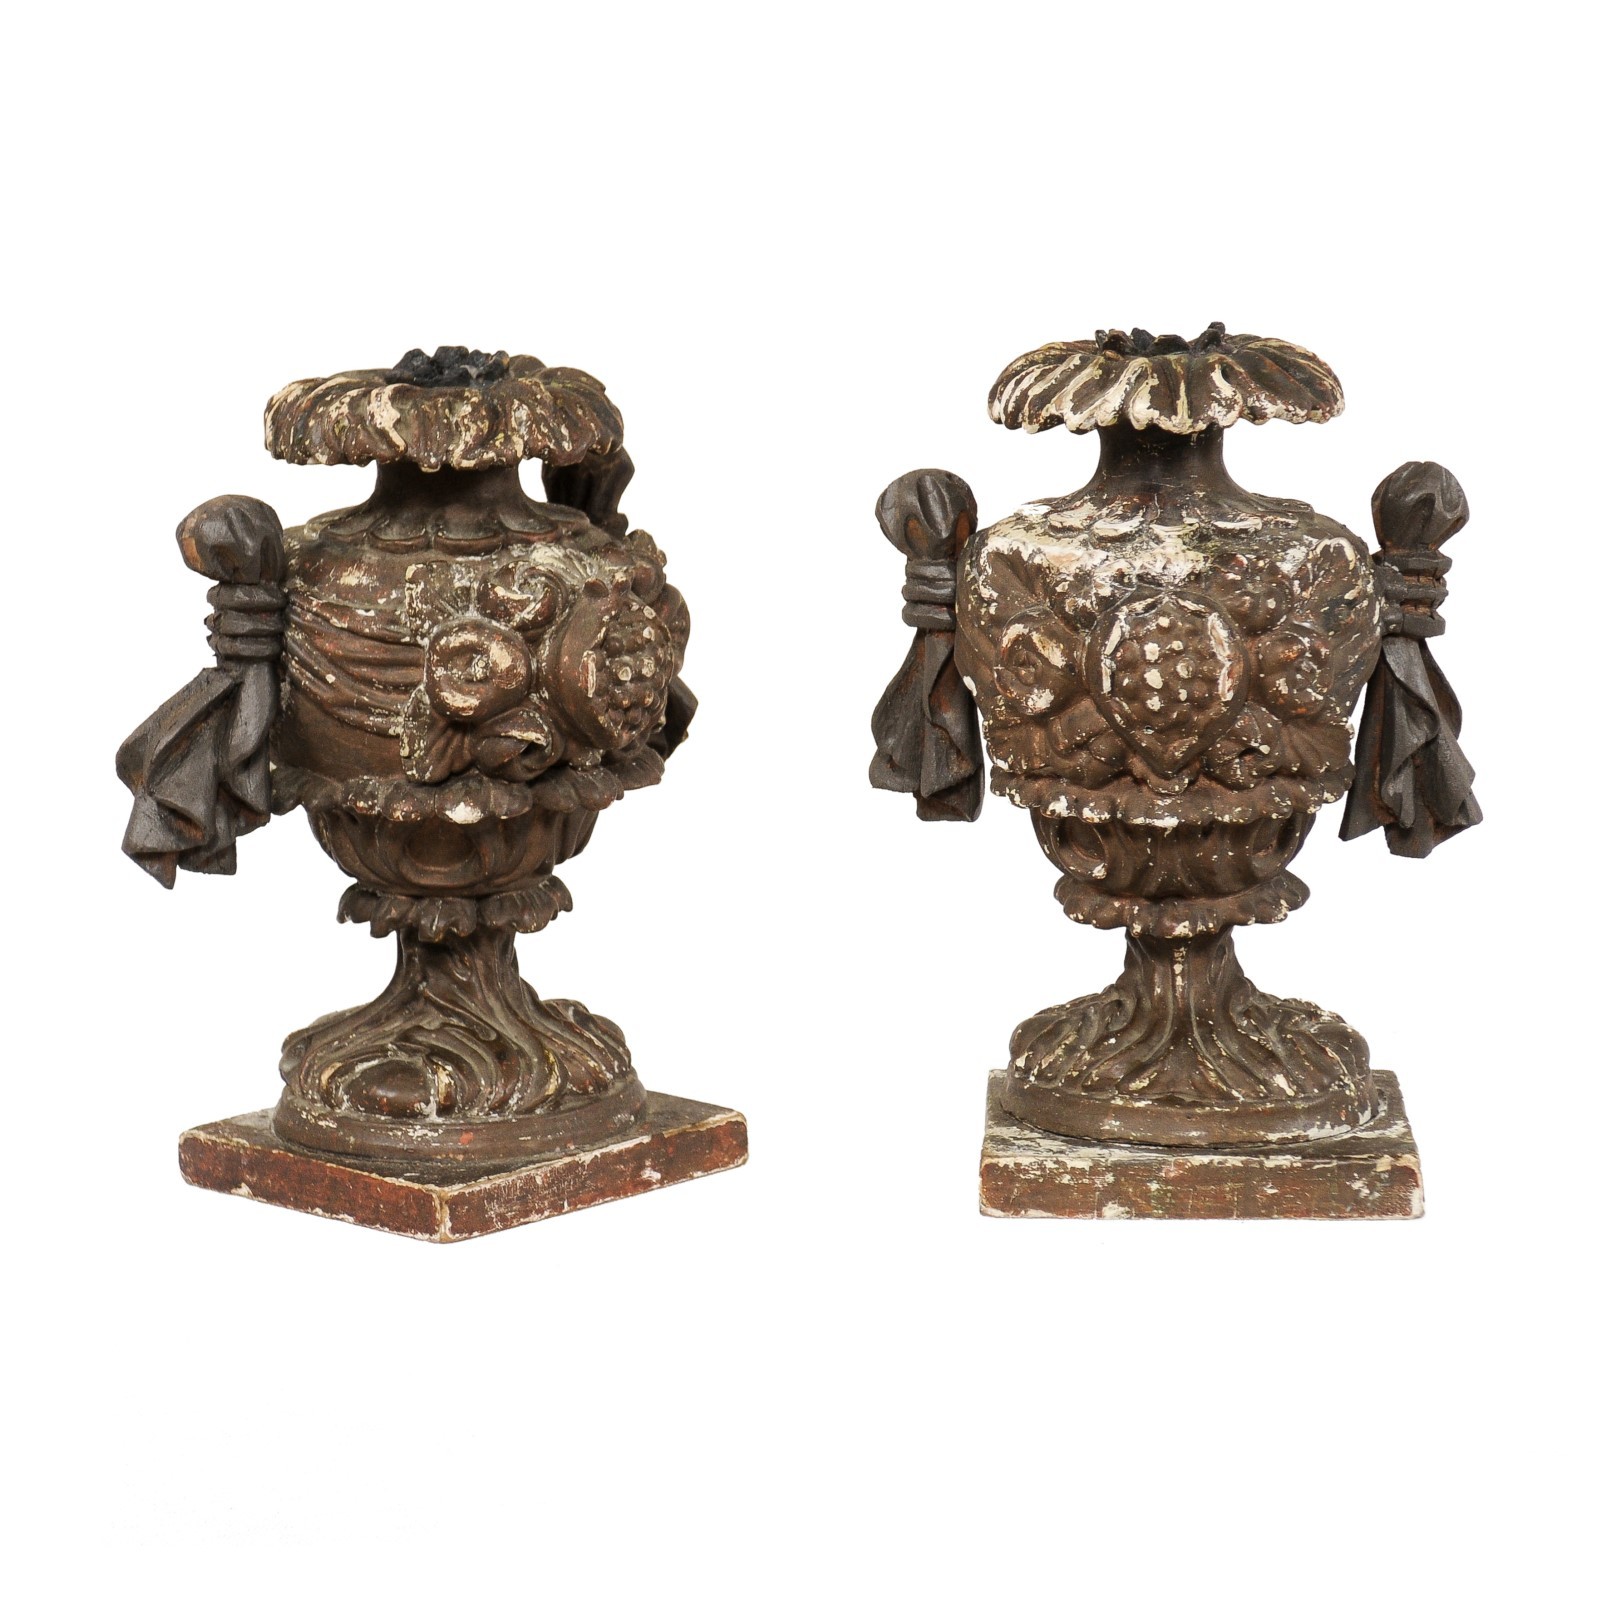 Antique Italian Urn & Floral Candle Holders